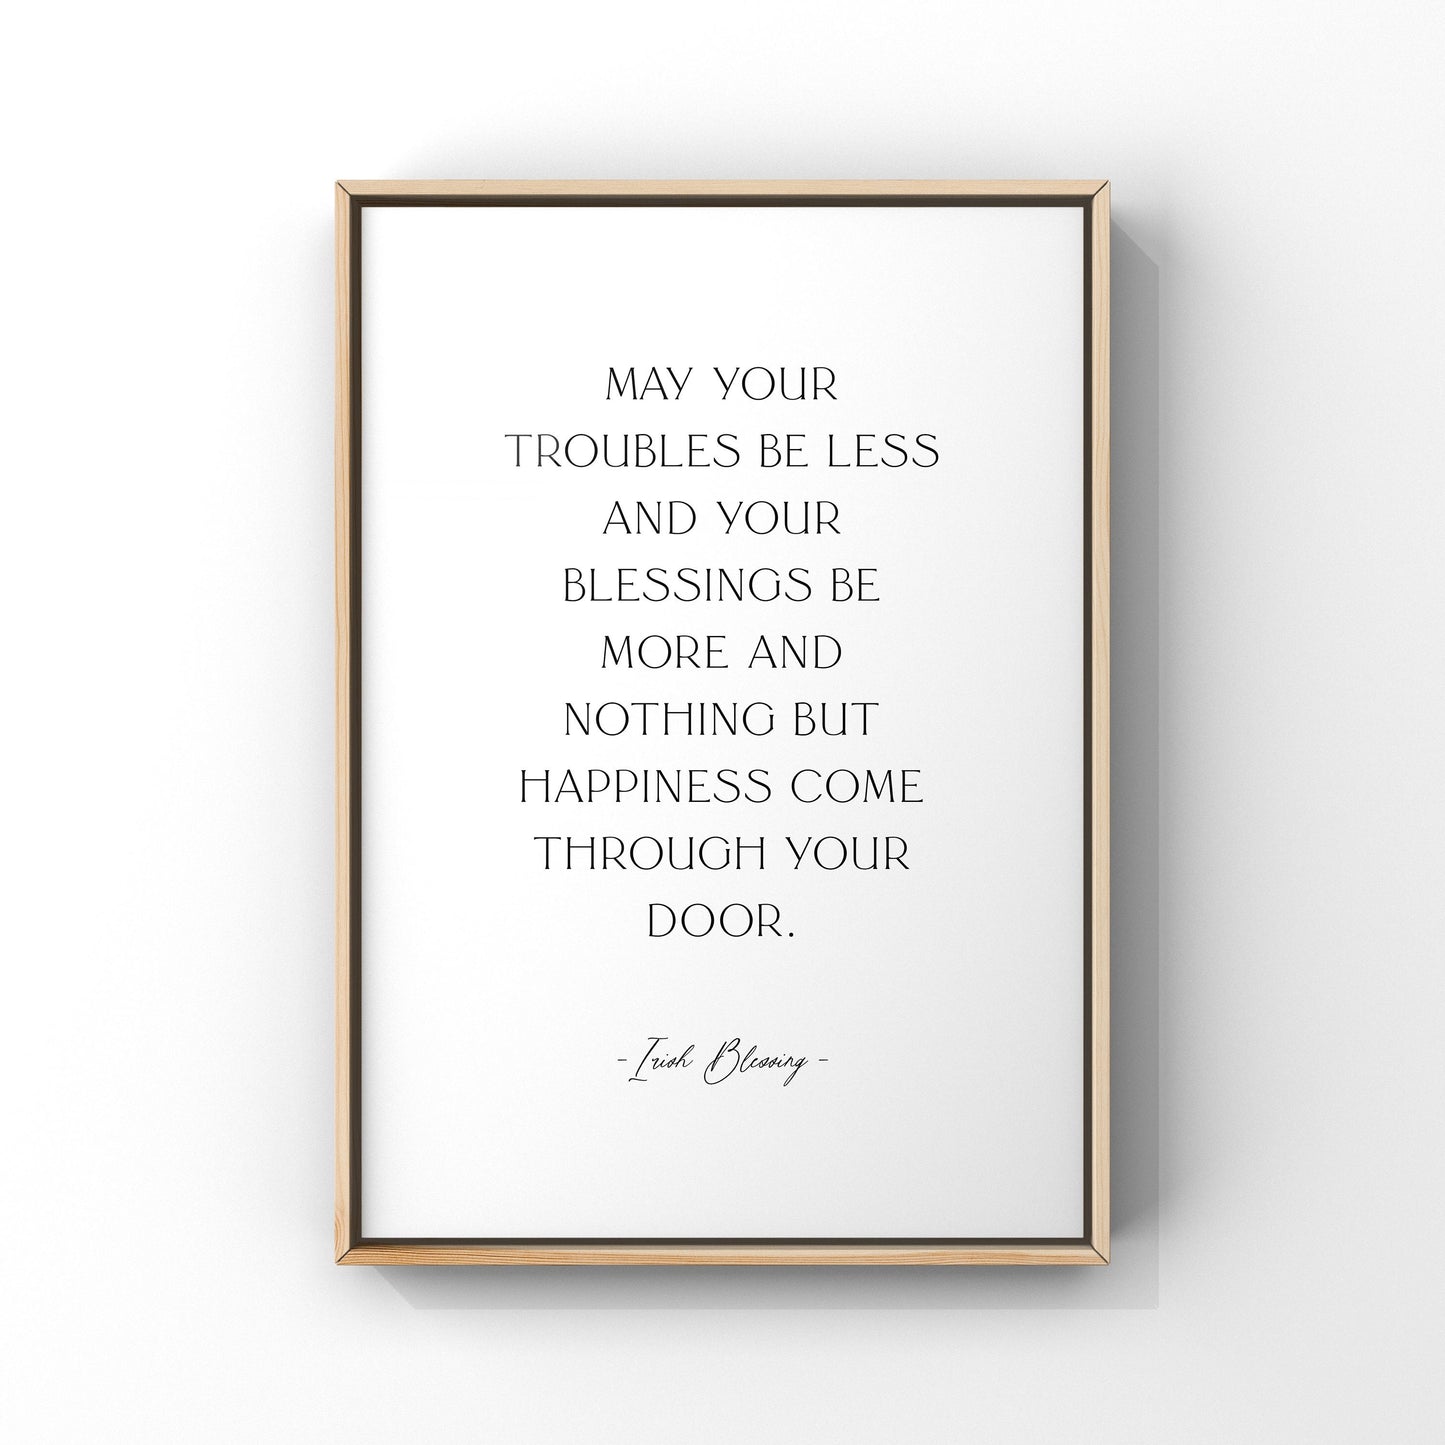 May your troubles be less and your blessings be more, Irish Blessing wall art, Irish blessing quote print, St Patricks decor, Blessings sign